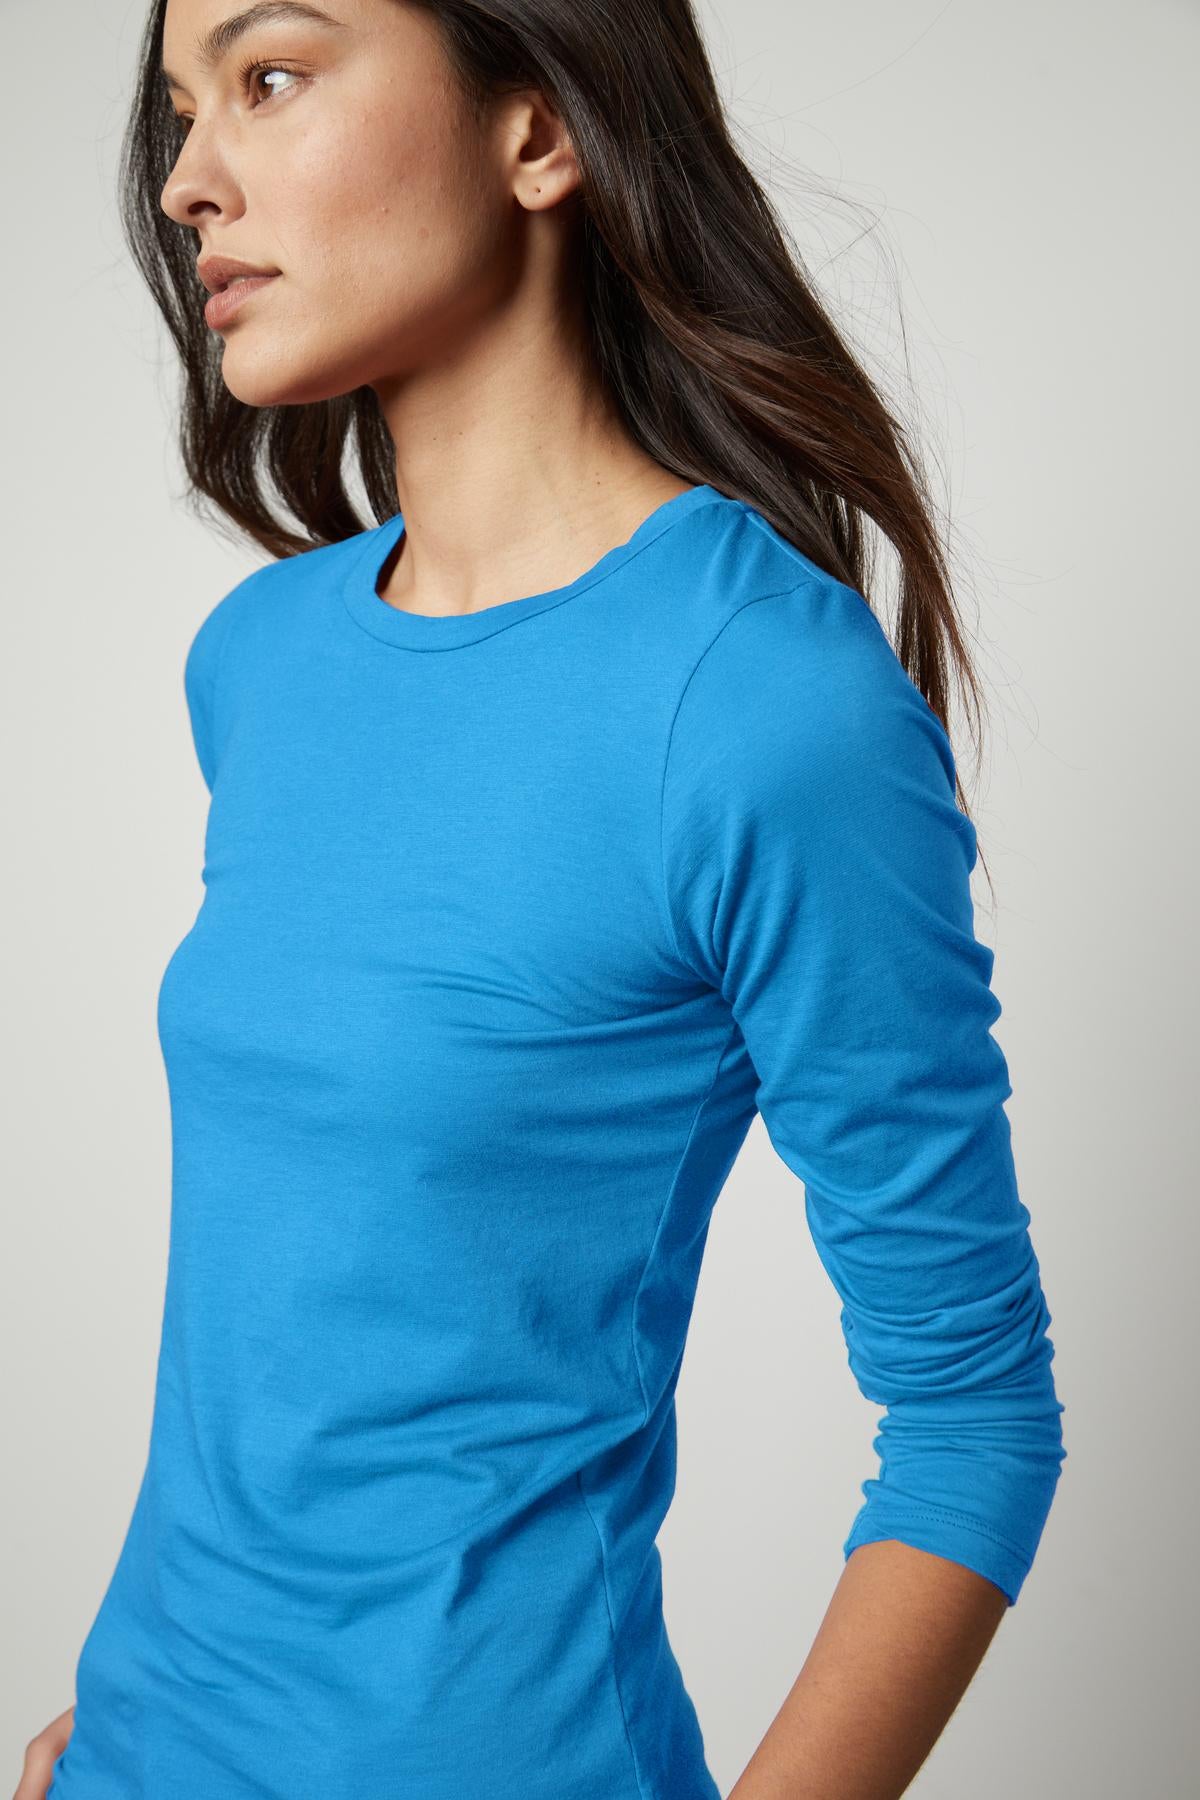 A woman wearing a Velvet by Graham & Spencer ZOFINA GAUZY WHISPER FITTED CREW NECK TEE-perfection.-35503495315649